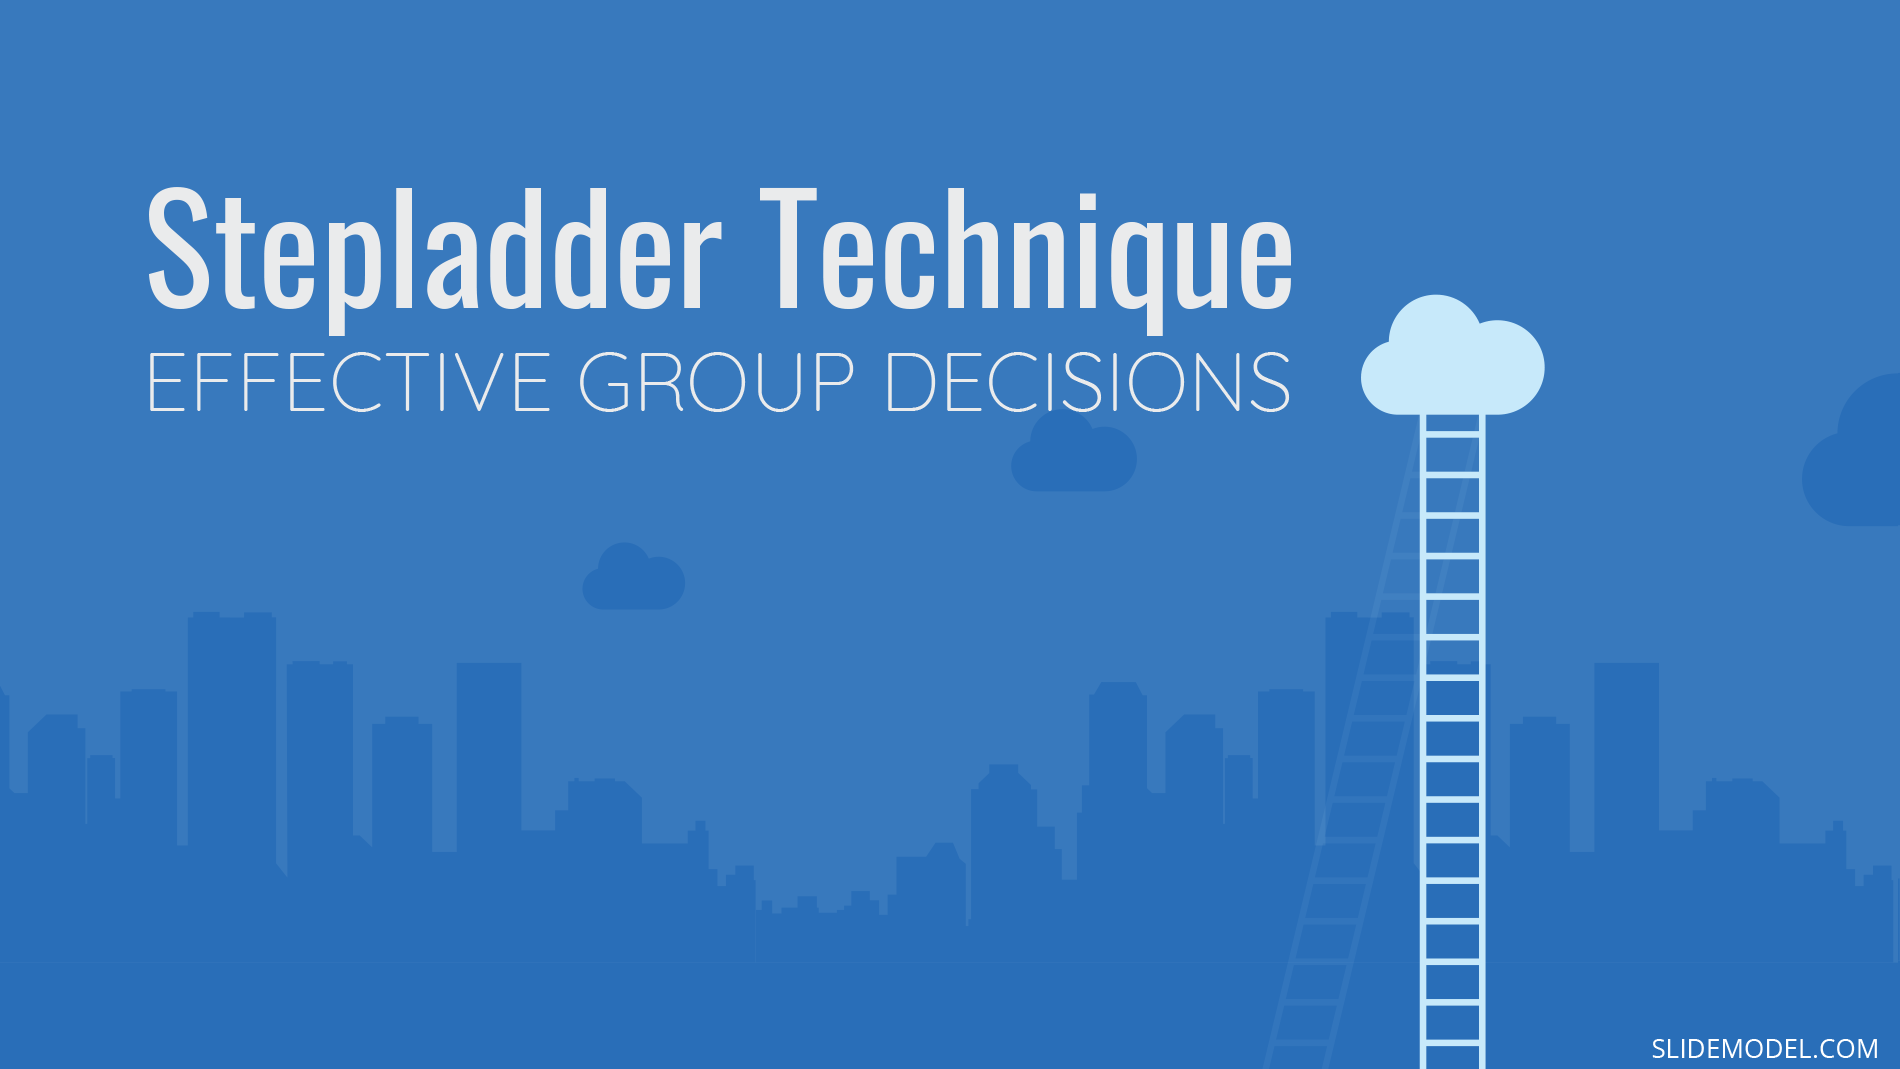 Making Effective Group Decisions with the Stepladder Technique PPT Template